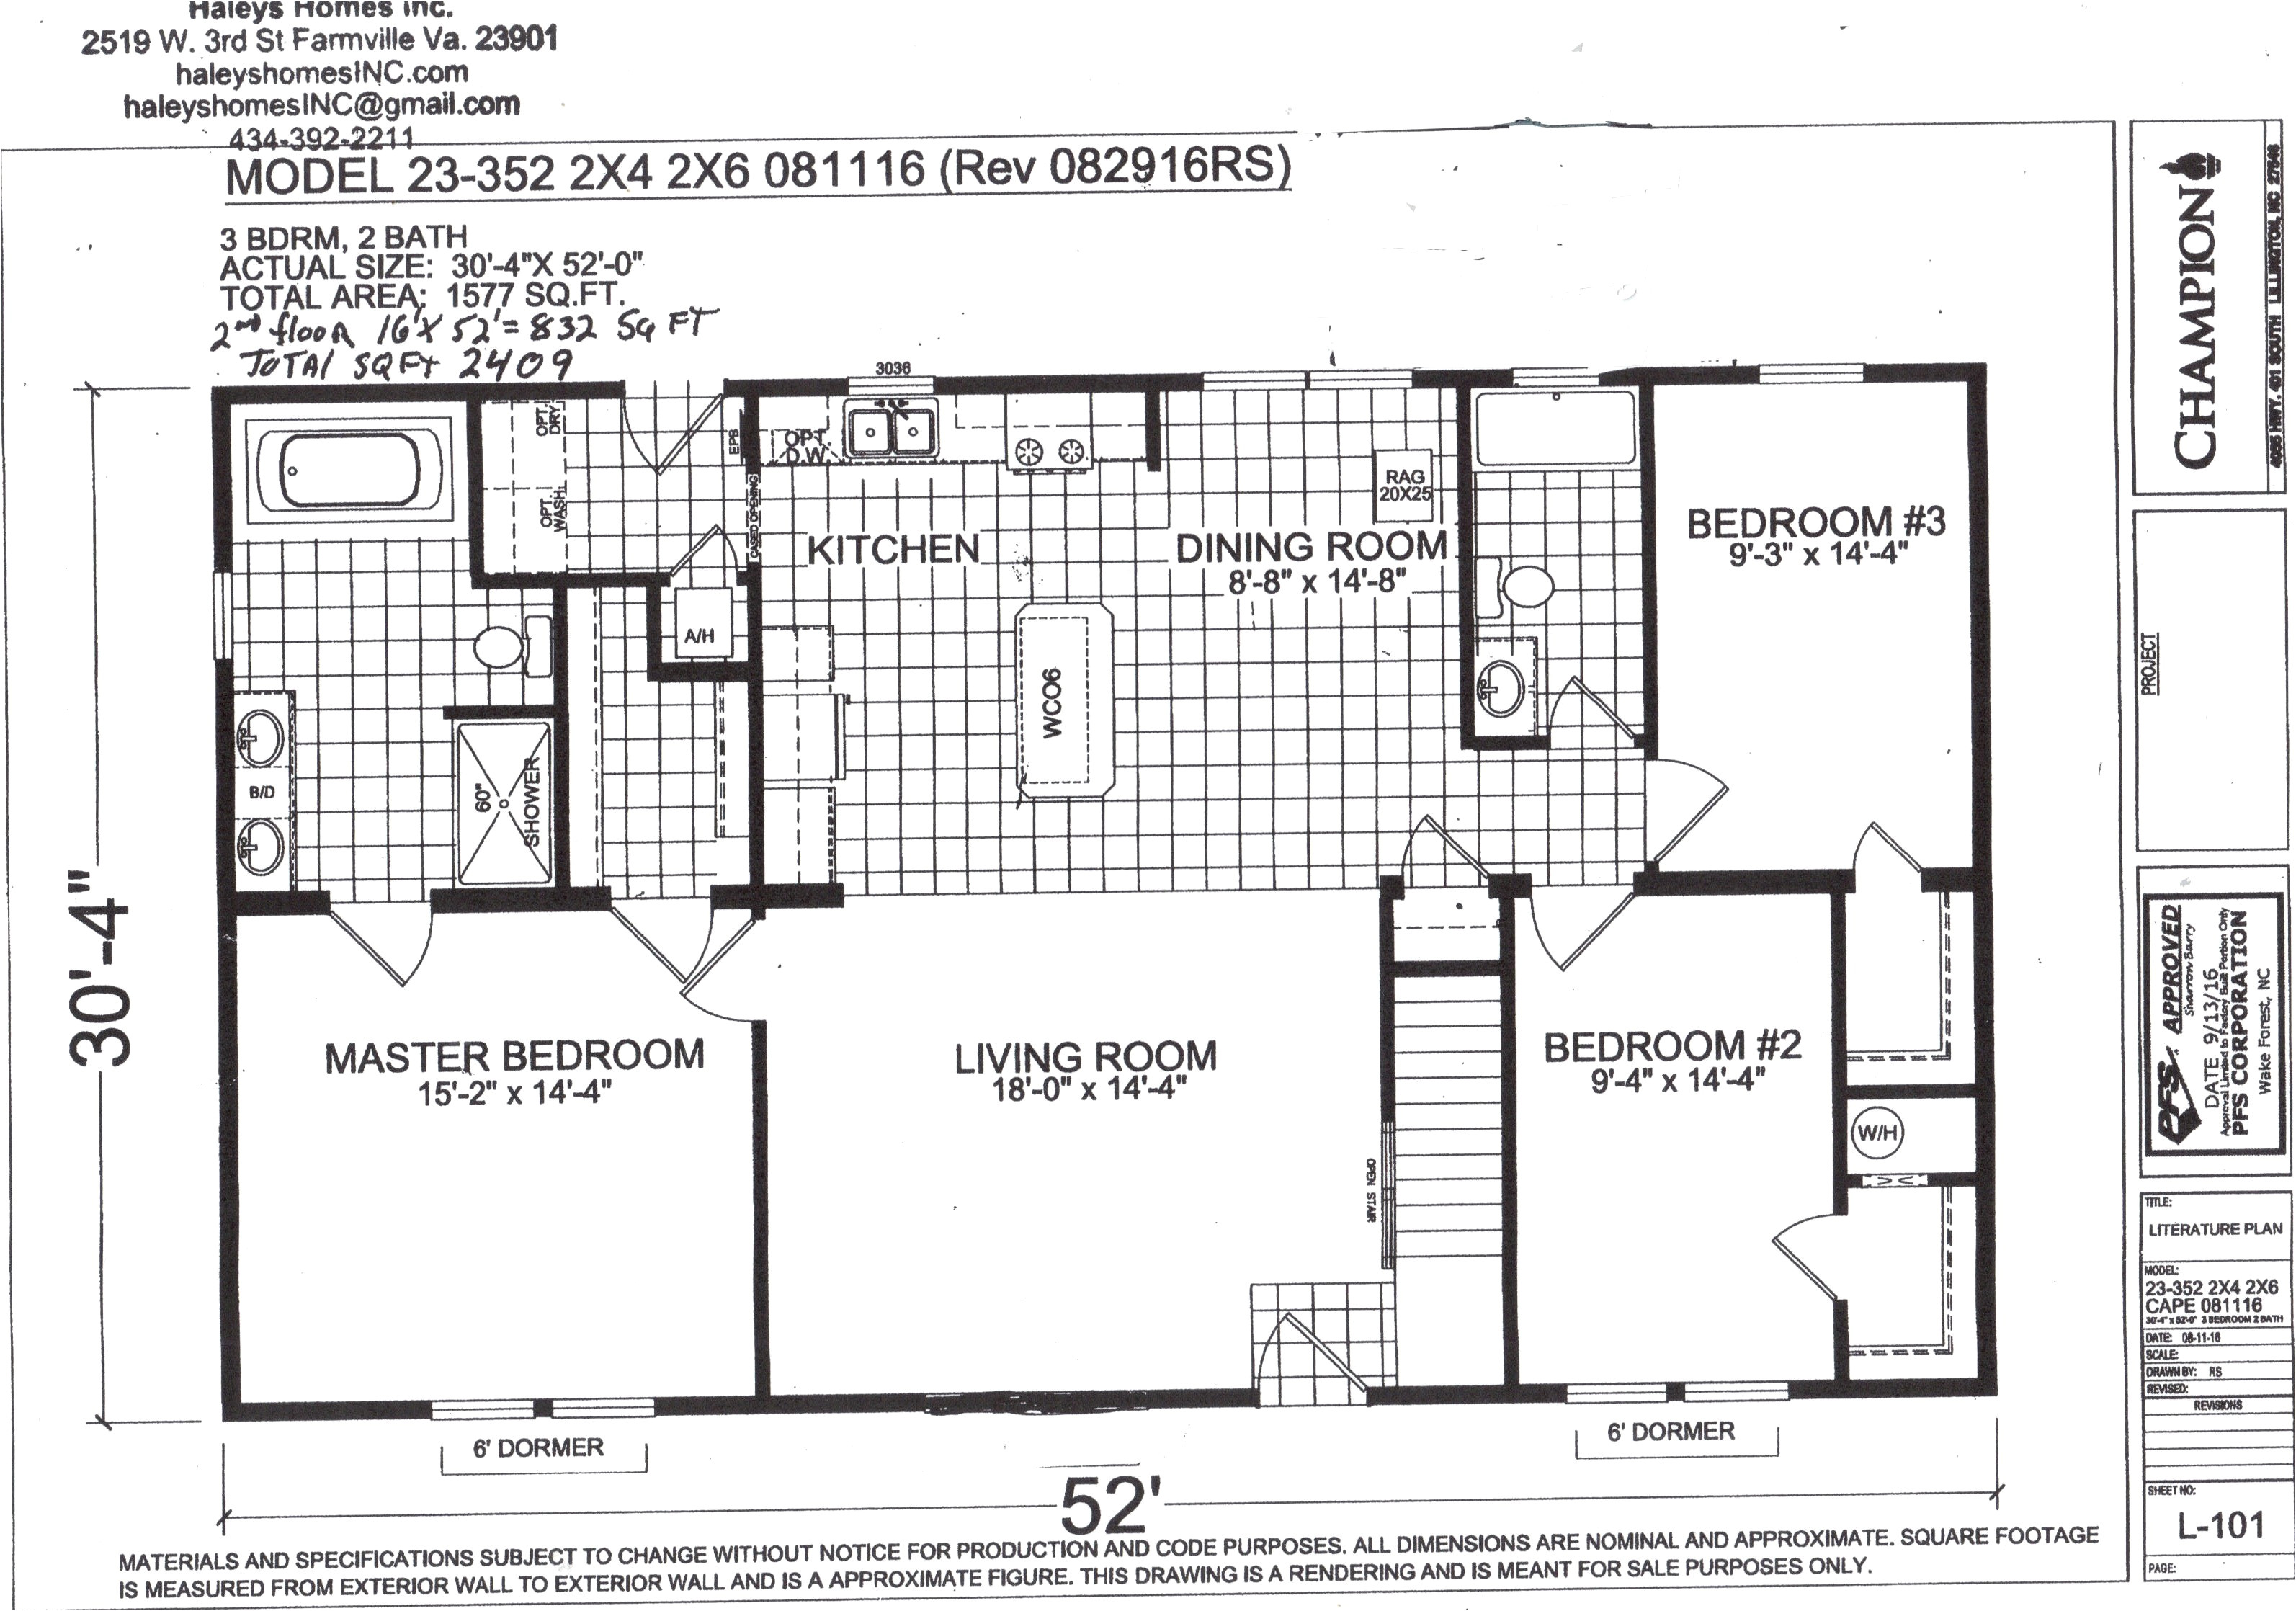 modular homes floor plans and prices luxury manufactured homes floor plans prices lovely moduline homes floor